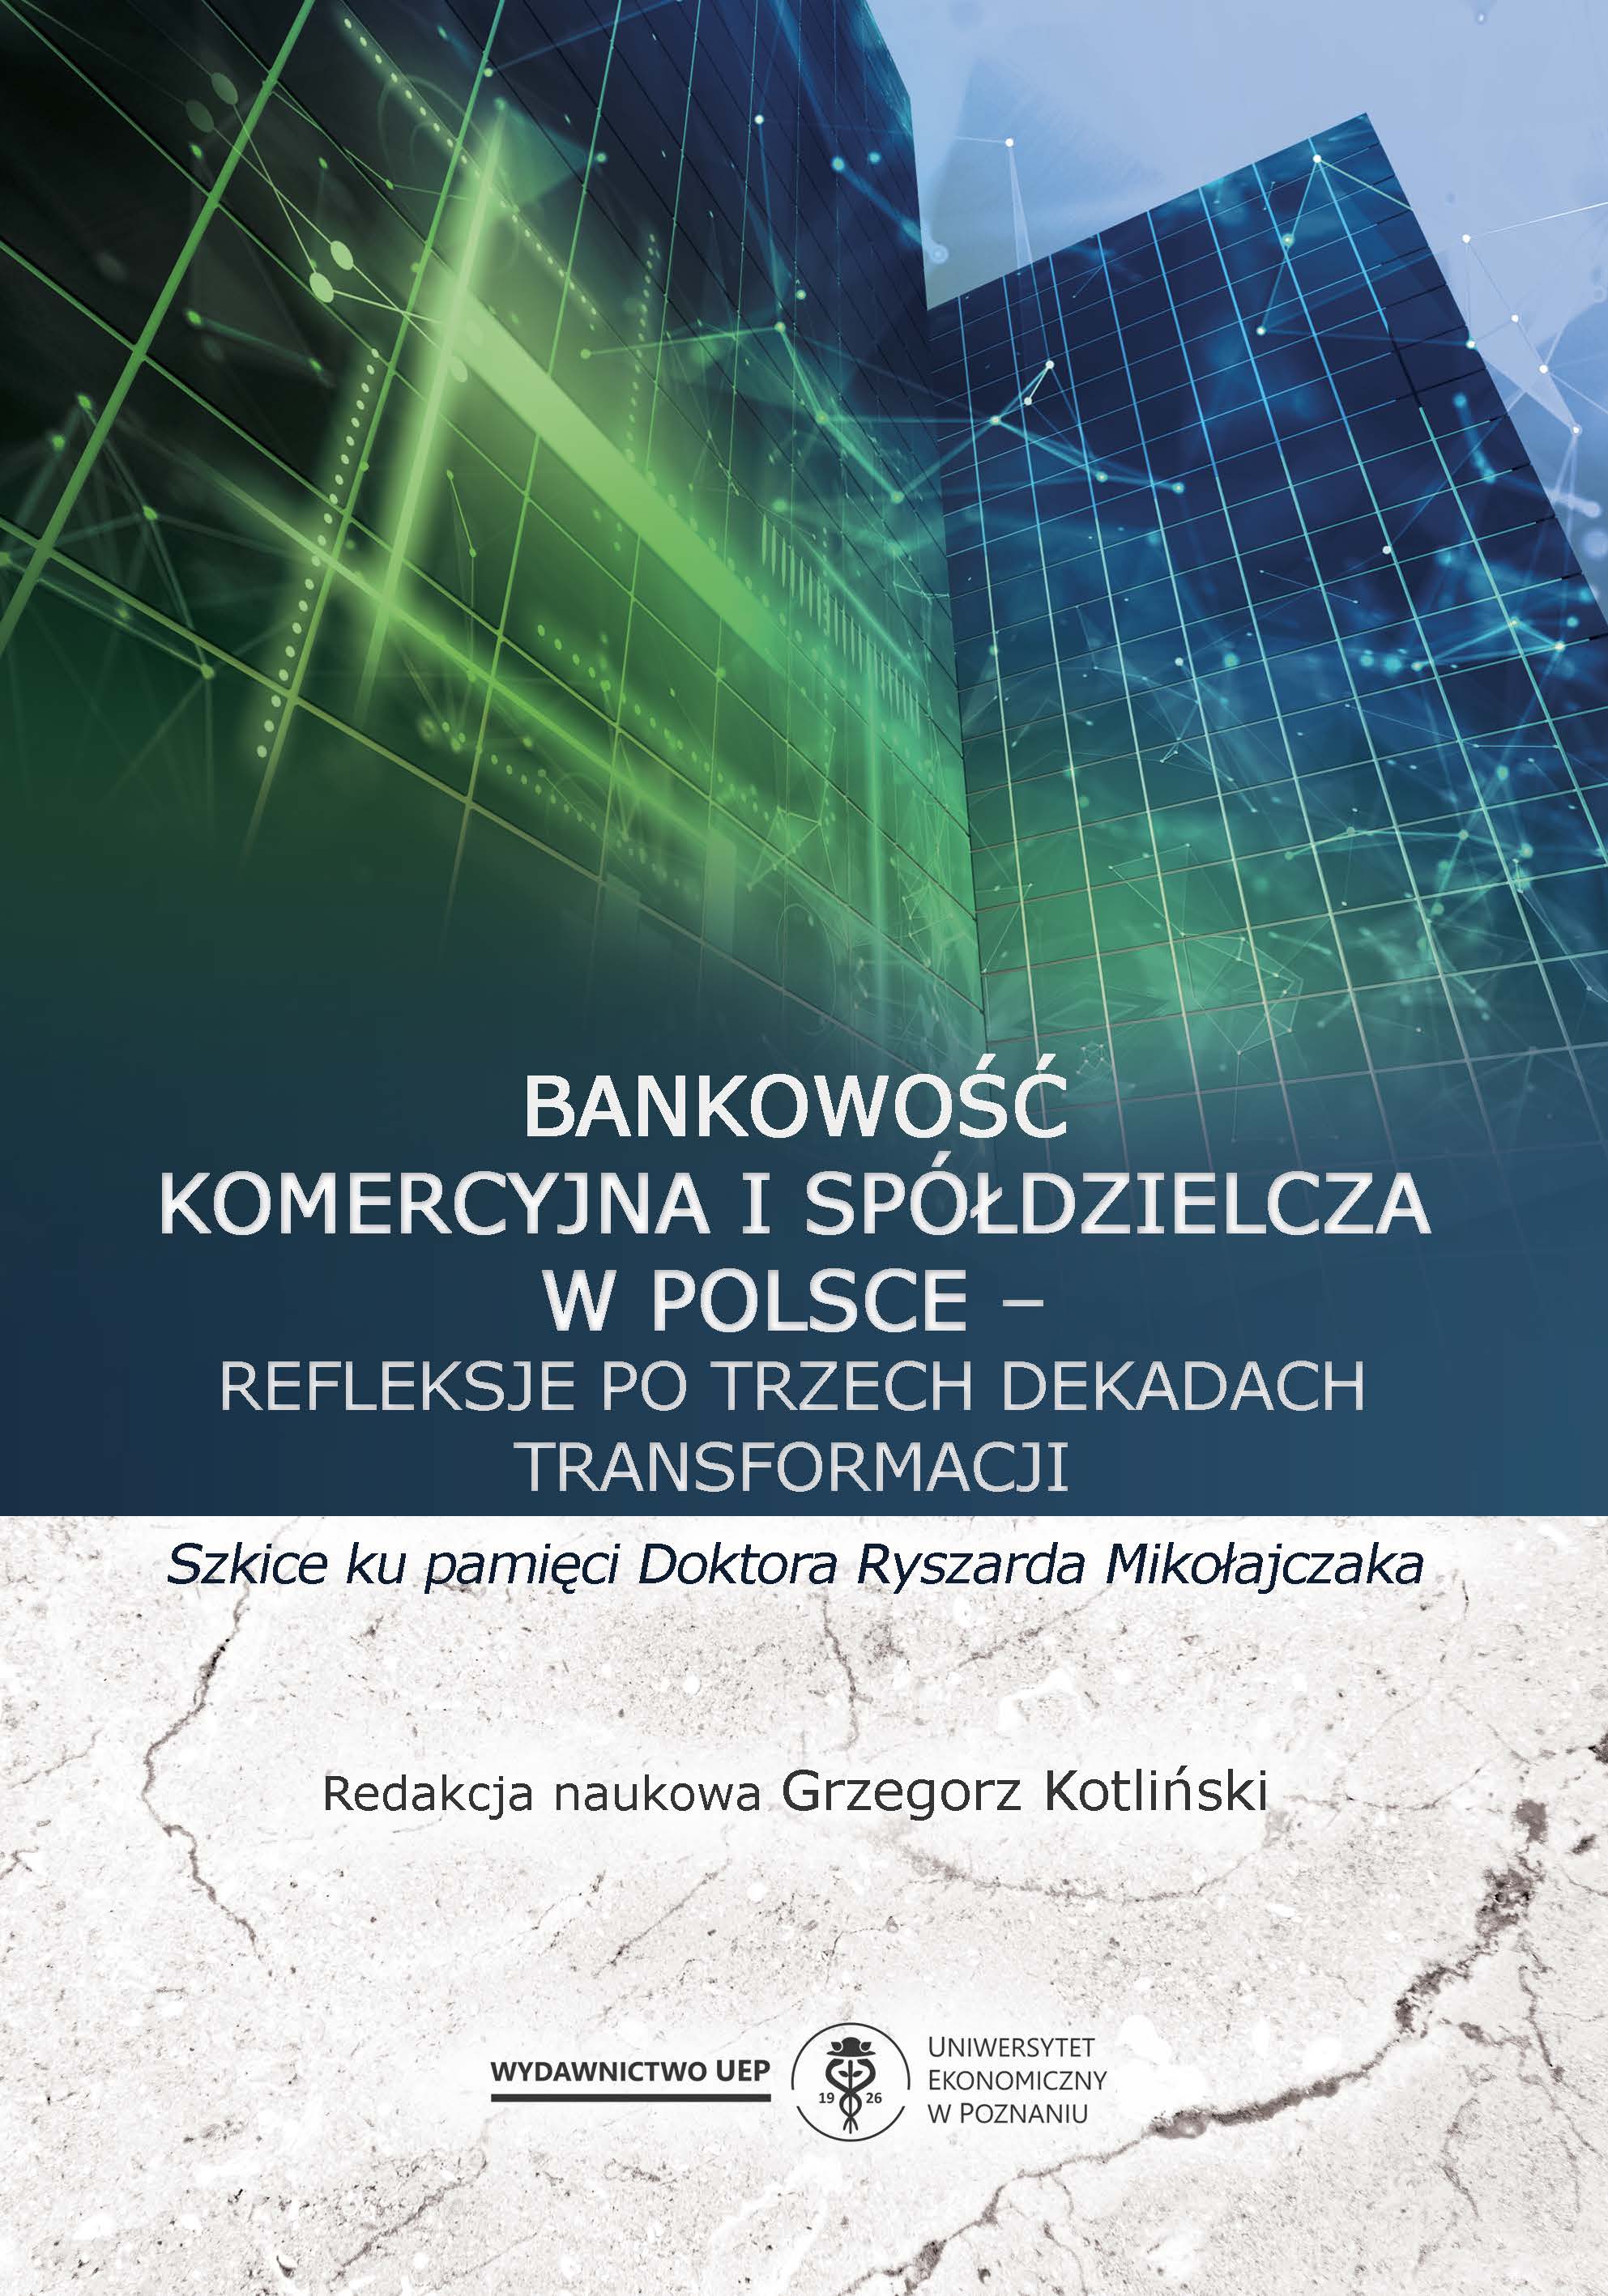 Commercial and cooperative banking in Poland - reflections after three decades of transformation. In memory of Ryszard Mikołajczak